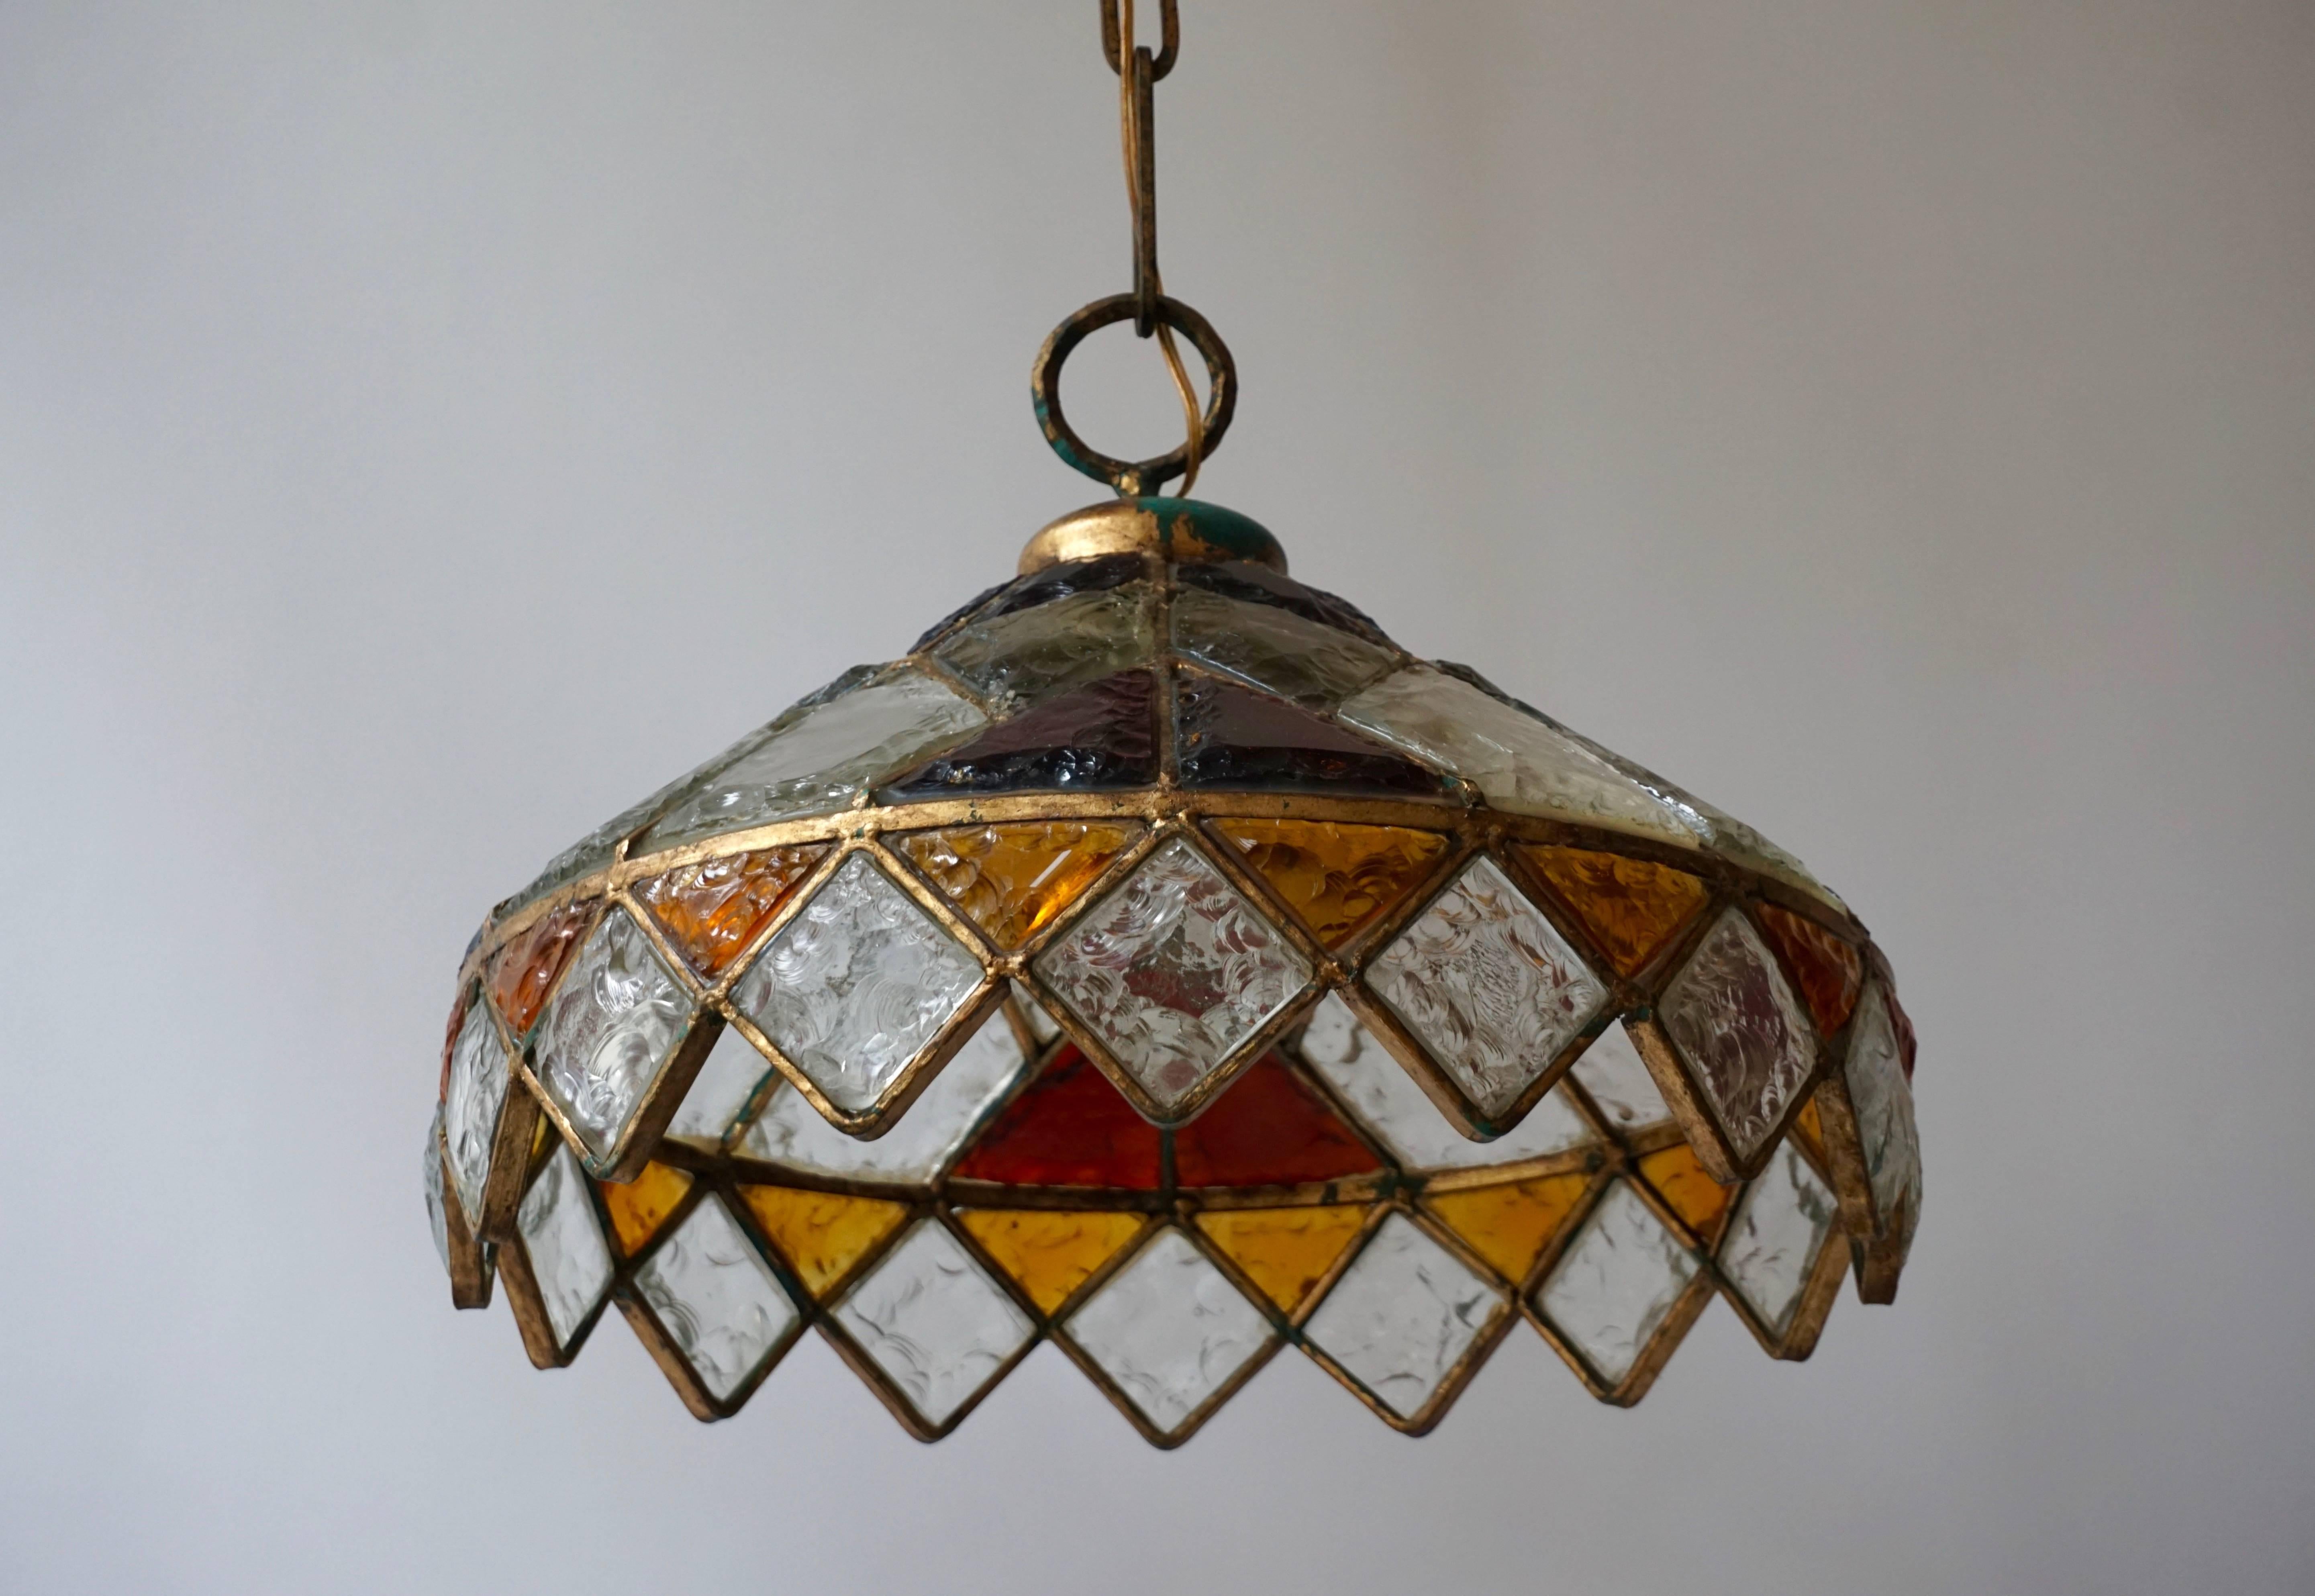 Rare colored stained glass chandelier. 

Measure: 
Total height with the chain is 125 cm.
The diameter is 52 cm.
The weight is 14 kg.